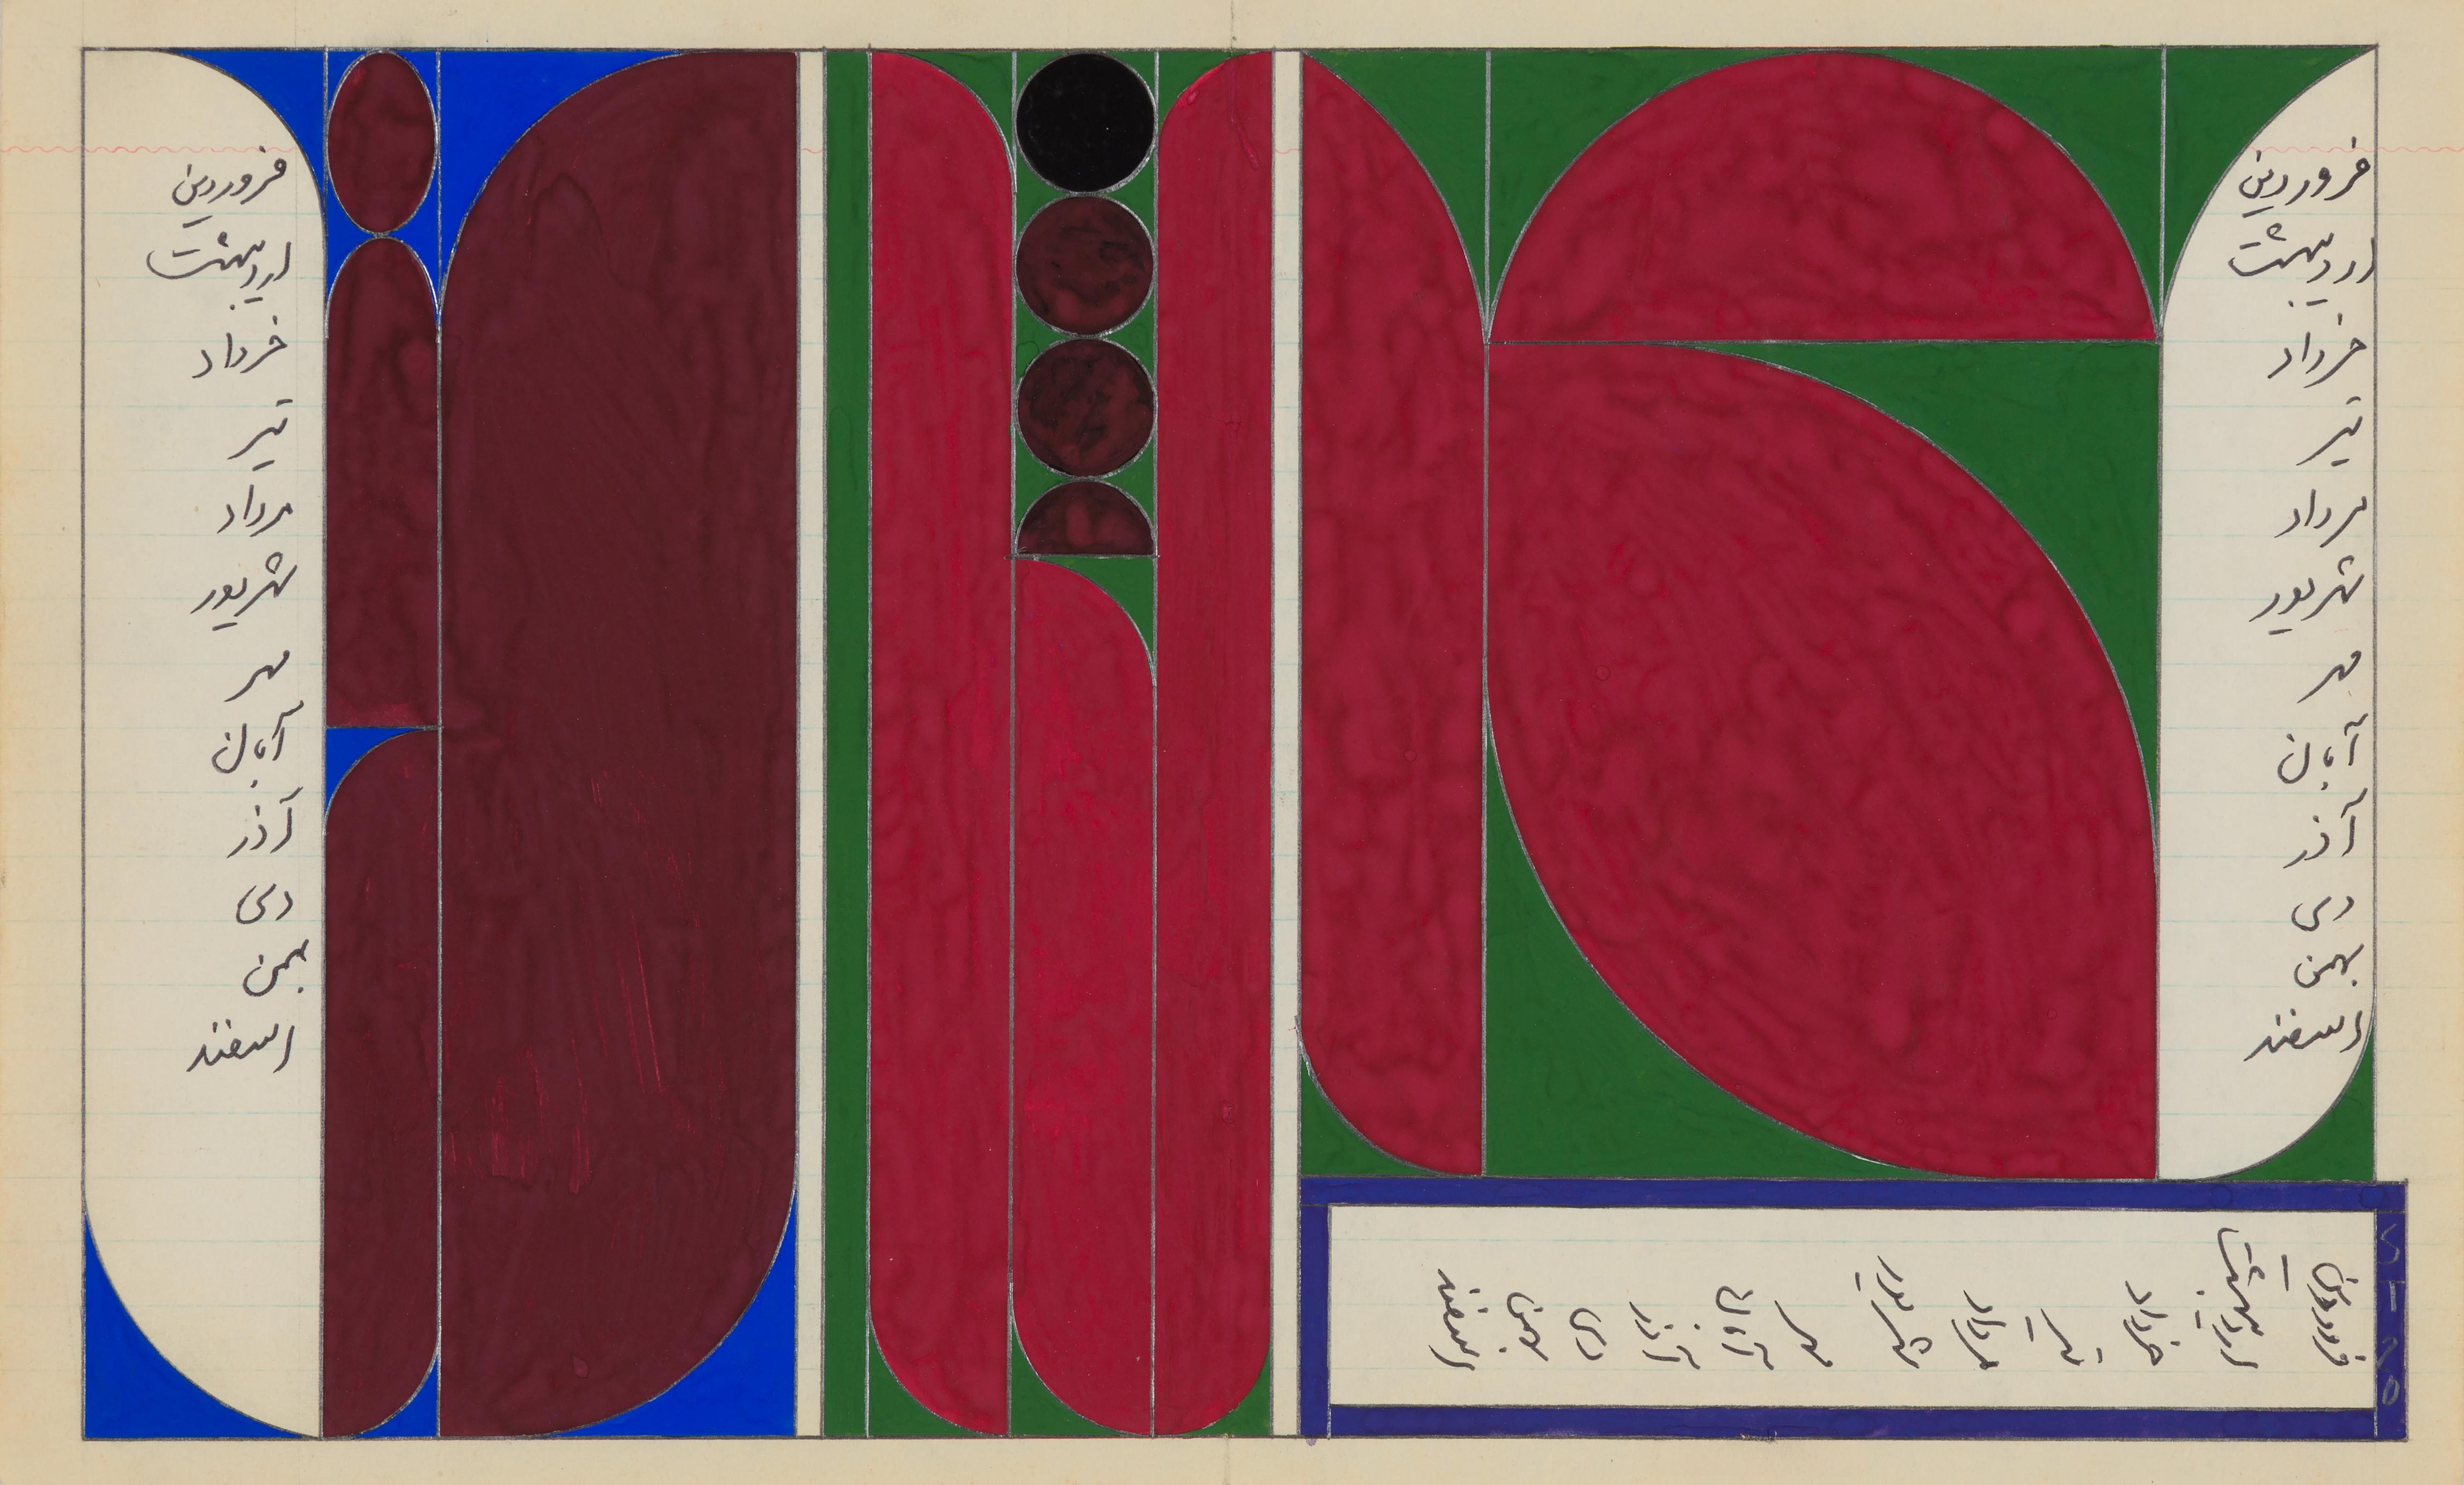 Shabahang Tayyari, Thirty six bloody months & three red tulips & one black pearl, 2020, Gouache pen & pencil on paper, 34.2 x 21.2 CM